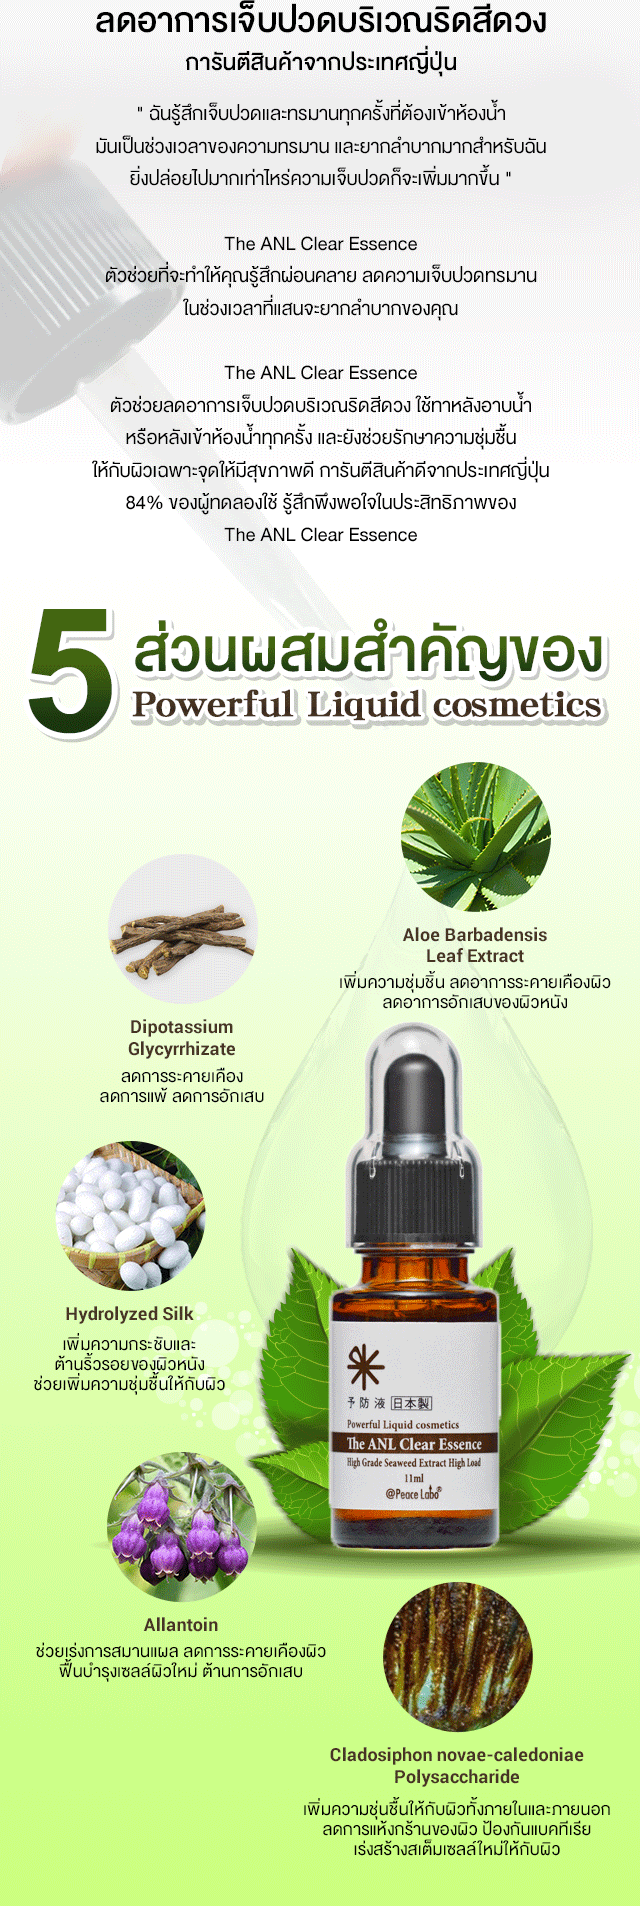 The ANL Clear Essence รีวิว